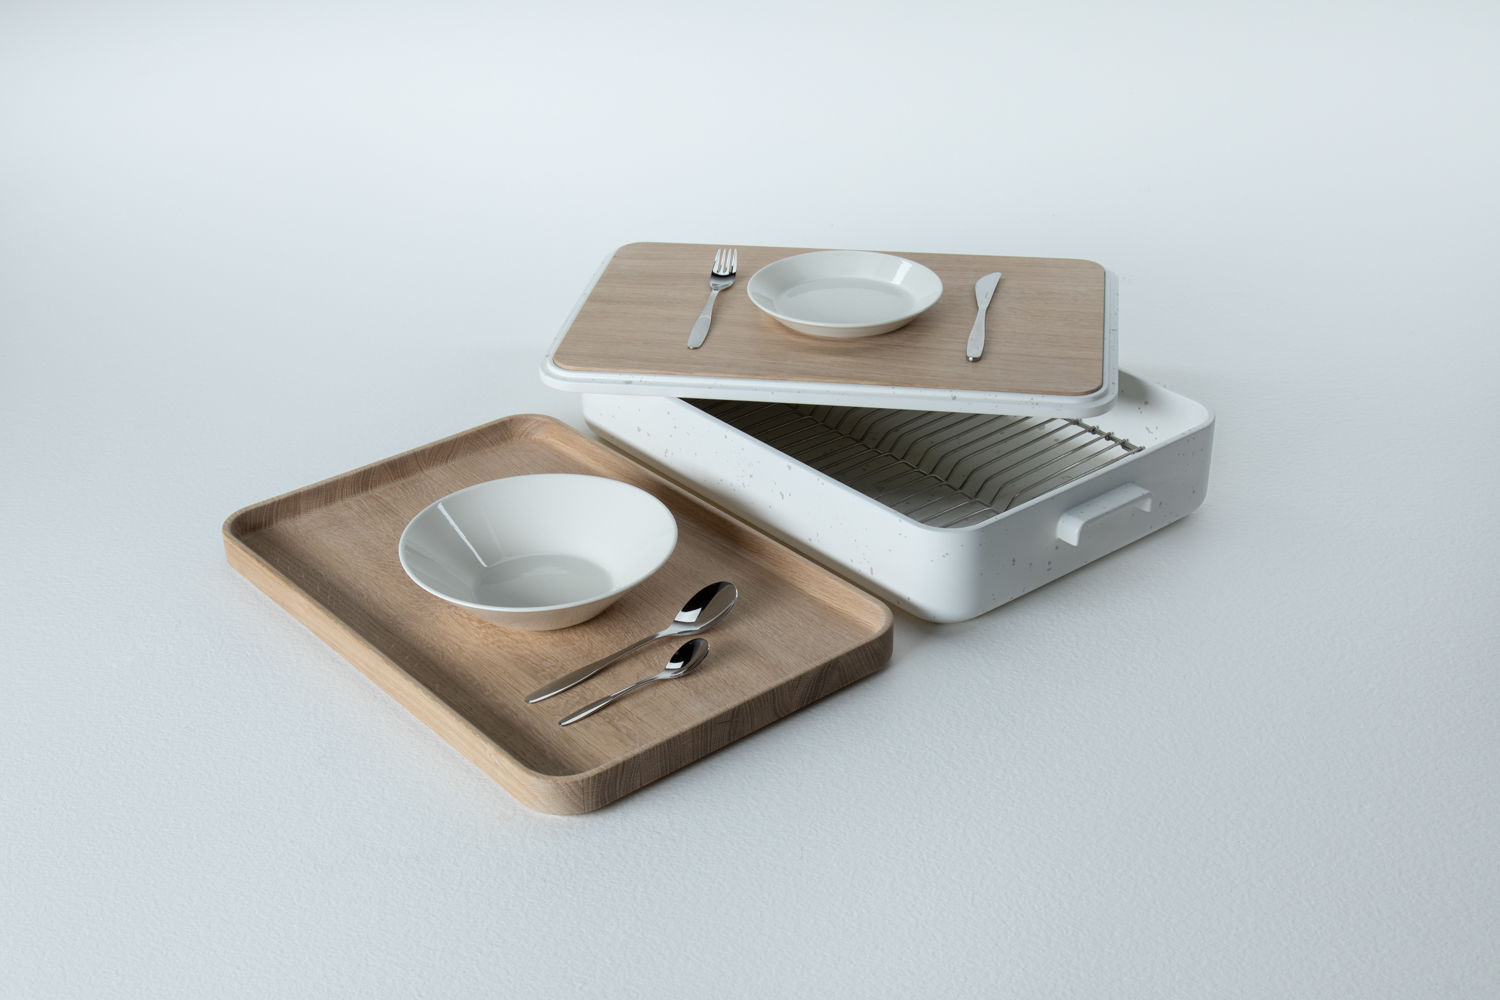 set of kitchenware on wooden surfaces